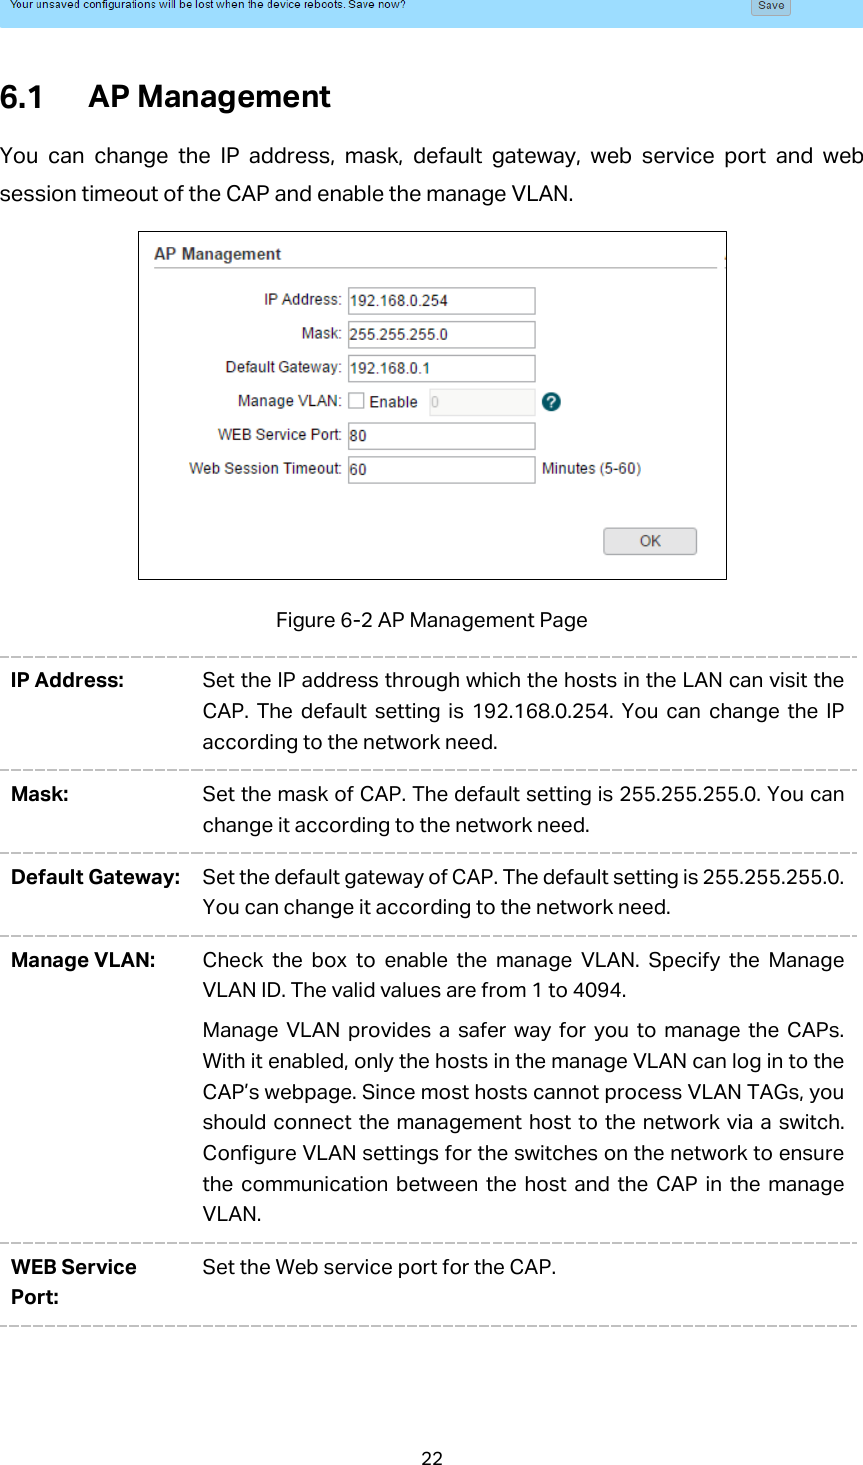   AP Management You can change the IP address, mask, default gateway, web service port and web session timeout of the CAP and enable the manage VLAN.  Figure 6-2 AP Management Page IP Address:  Set the IP address through which the hosts in the LAN can visit the CAP. The default setting is 192.168.0.254. You can change the IP according to the network need.   Mask:  Set the mask of CAP. The default setting is 255.255.255.0. You can change it according to the network need. Default Gateway: Set the default gateway of CAP. The default setting is 255.255.255.0. You can change it according to the network need. Manage VLAN: Check the box to enable the manage VLAN. Specify the Manage VLAN ID. The valid values are from 1 to 4094. Manage VLAN provides a safer way for you to manage the CAPs. With it enabled, only the hosts in the manage VLAN can log in to the CAP’s webpage. Since most hosts cannot process VLAN TAGs, you should connect the management host to the network via a switch. Configure VLAN settings for the switches on the network to ensure the communication between the host and the CAP in the manage VLAN. WEB Service Port: Set the Web service port for the CAP. 22 